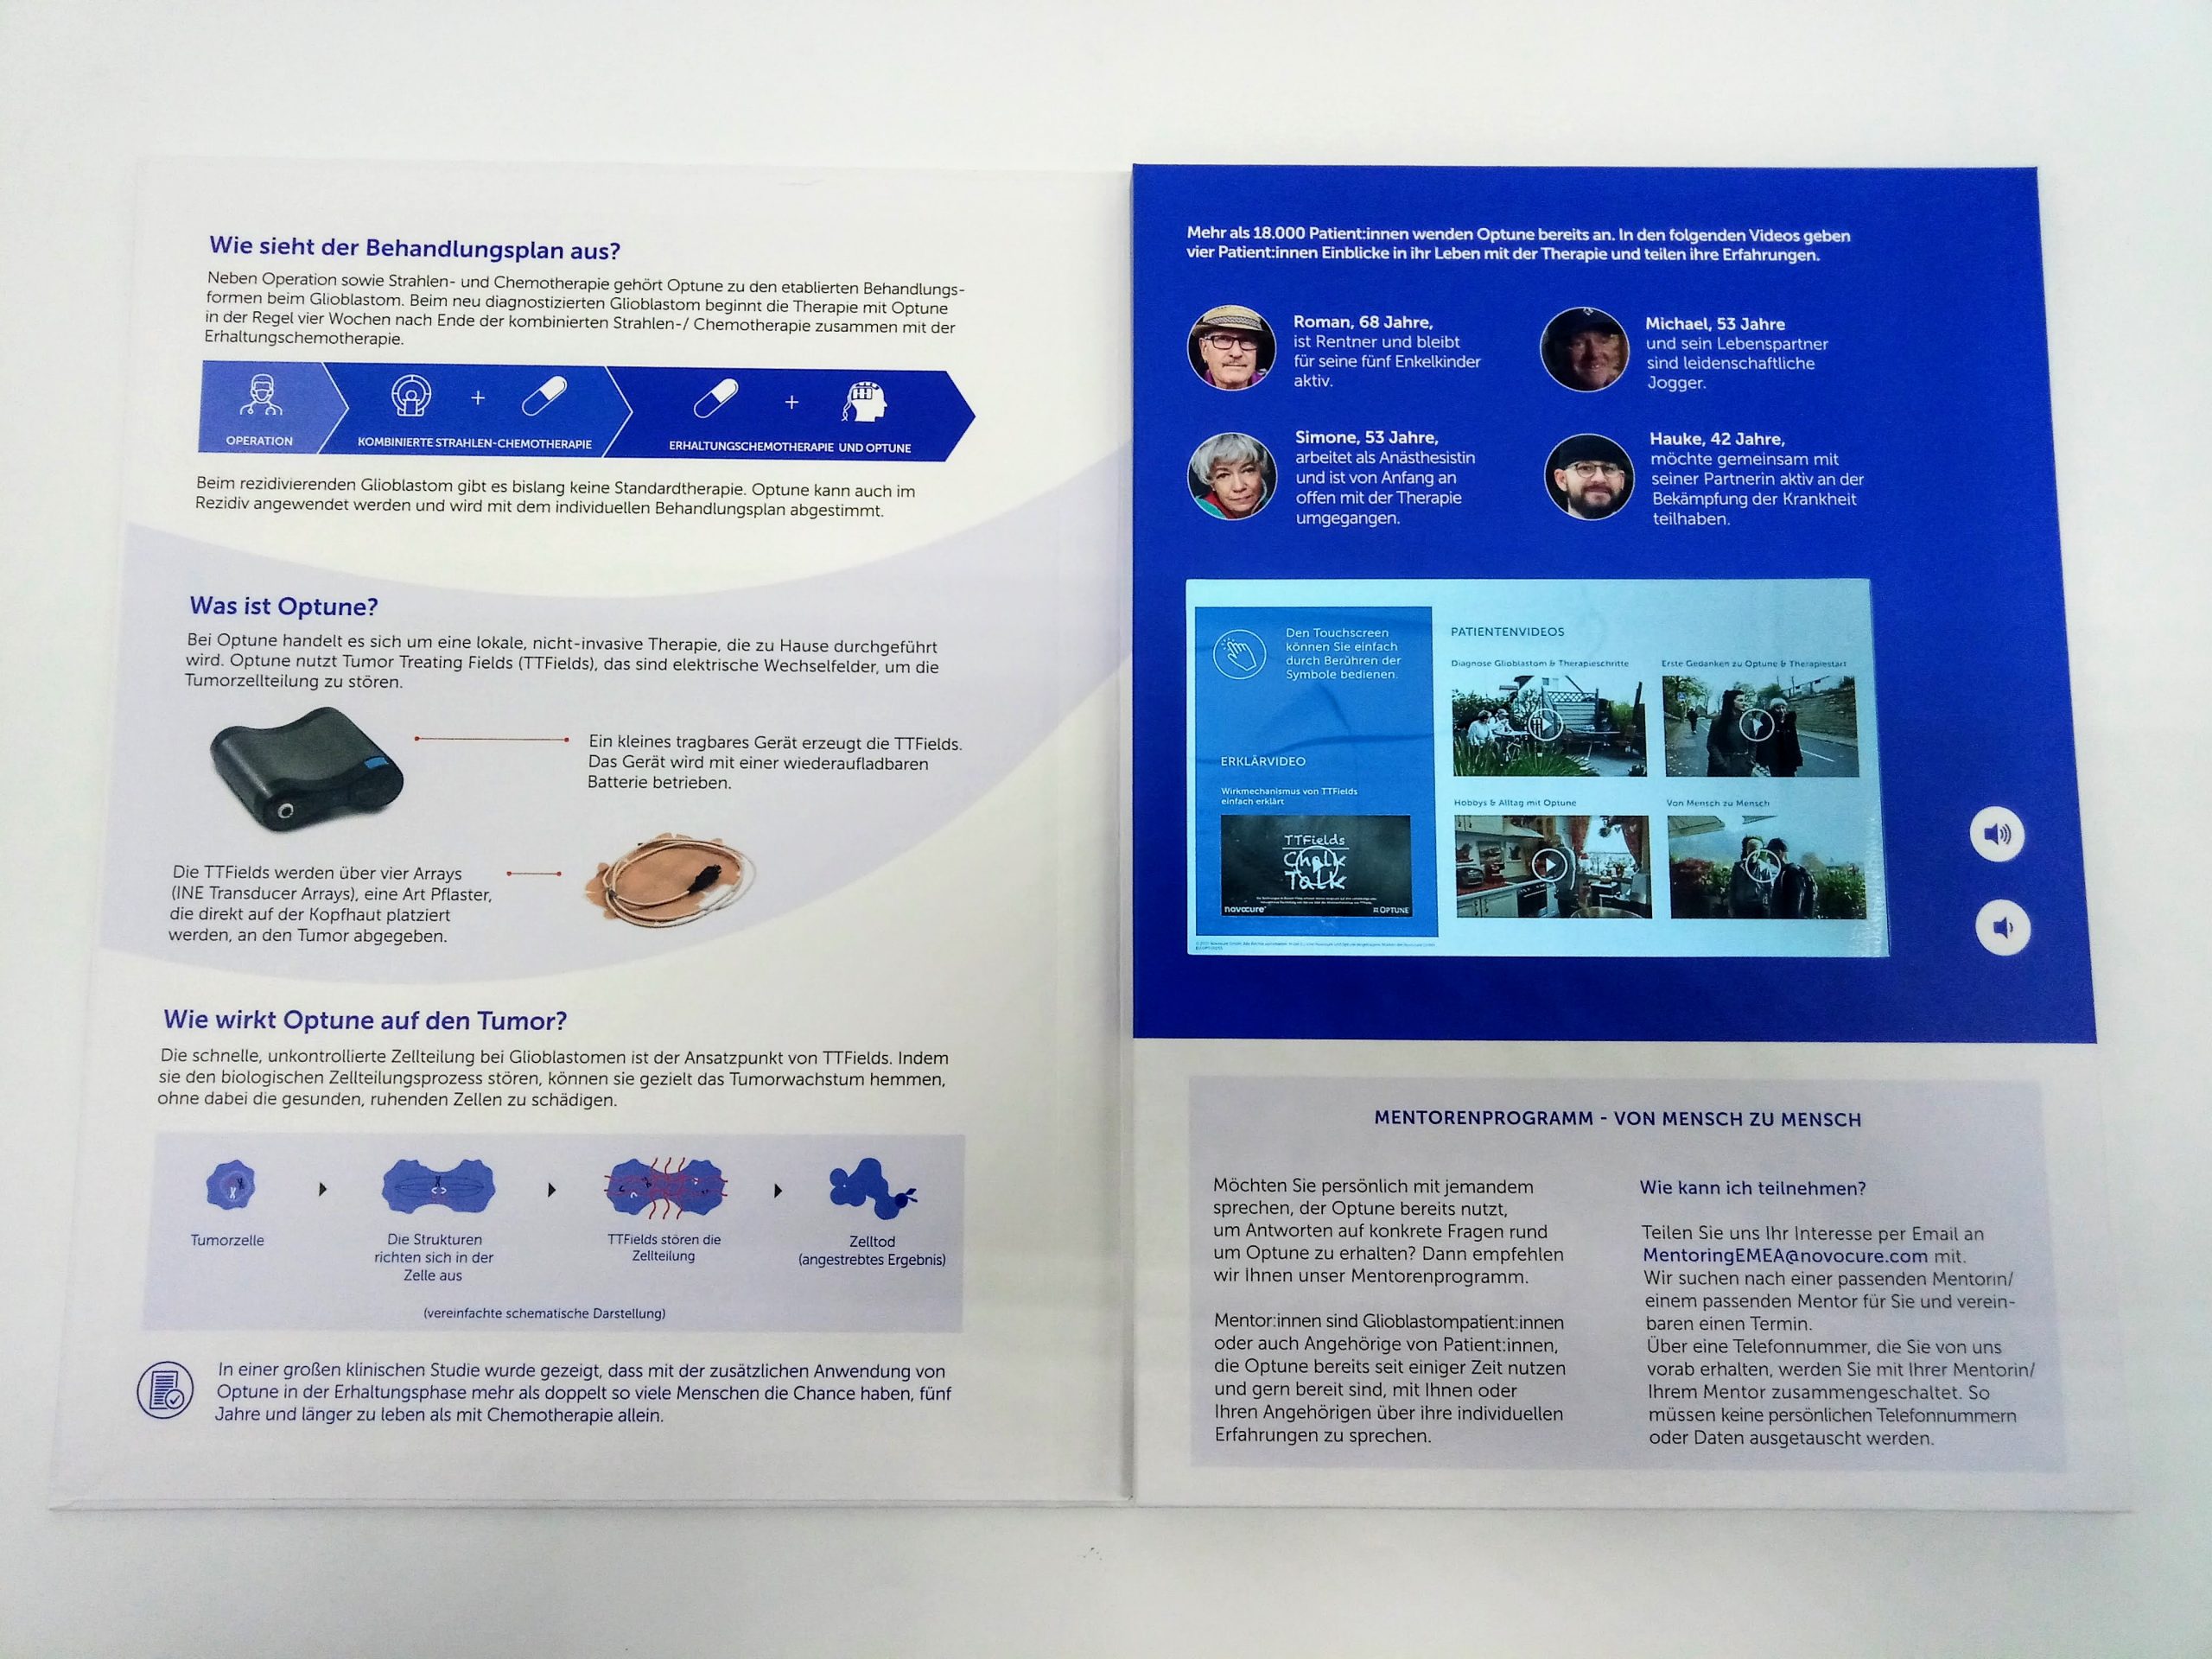 video brochure used in healthcare industry for marketing